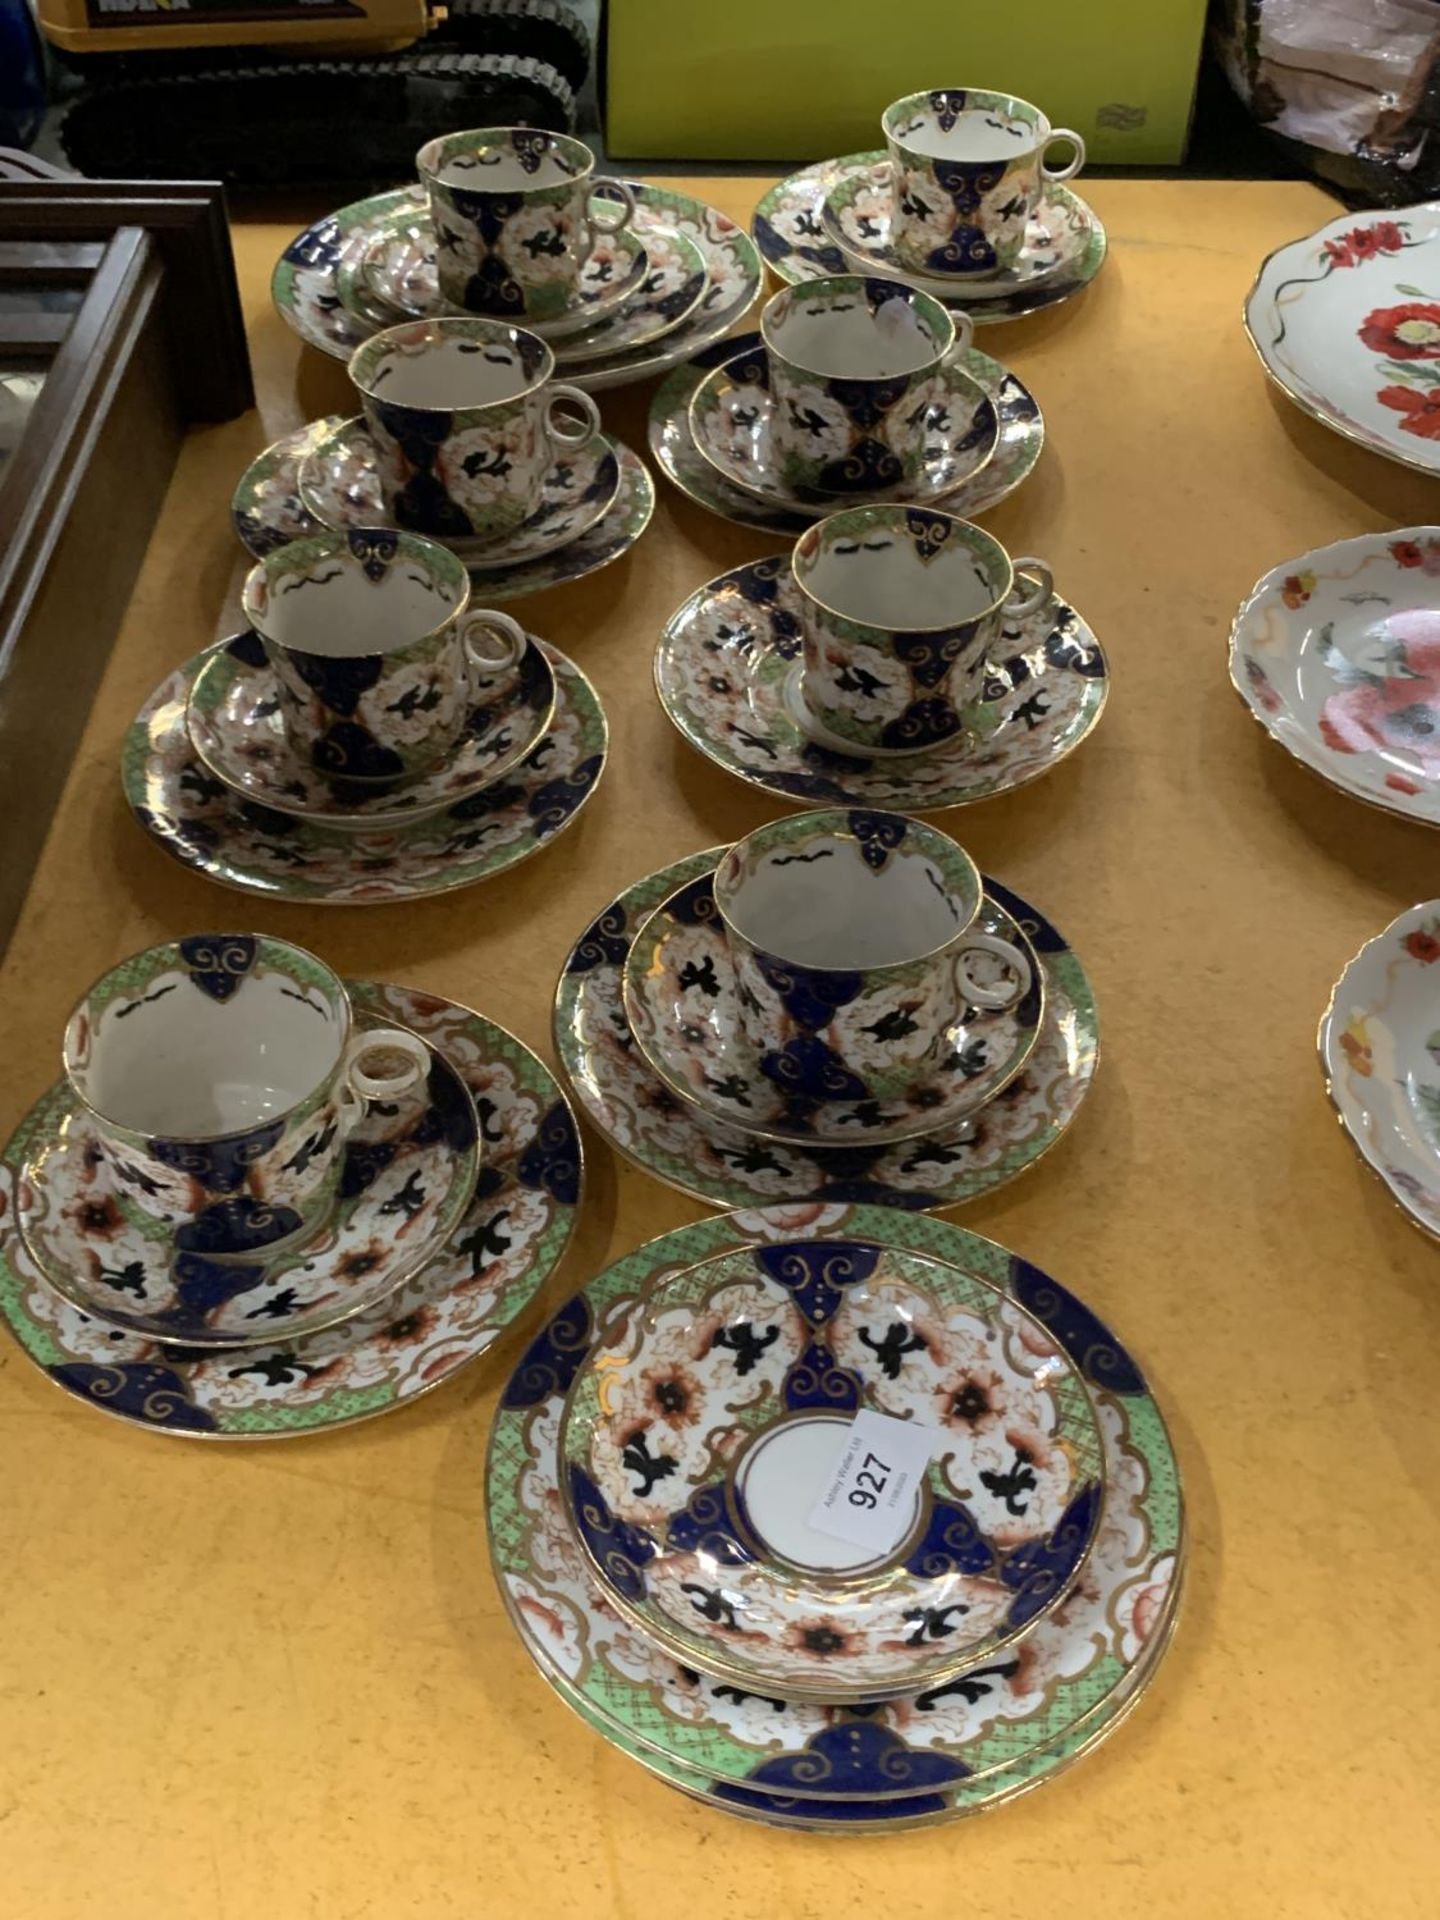 A COLLECTION OF VINTAGE ROYAL STAFFORD CUPS, SAUCERS AND SIDE PLATES